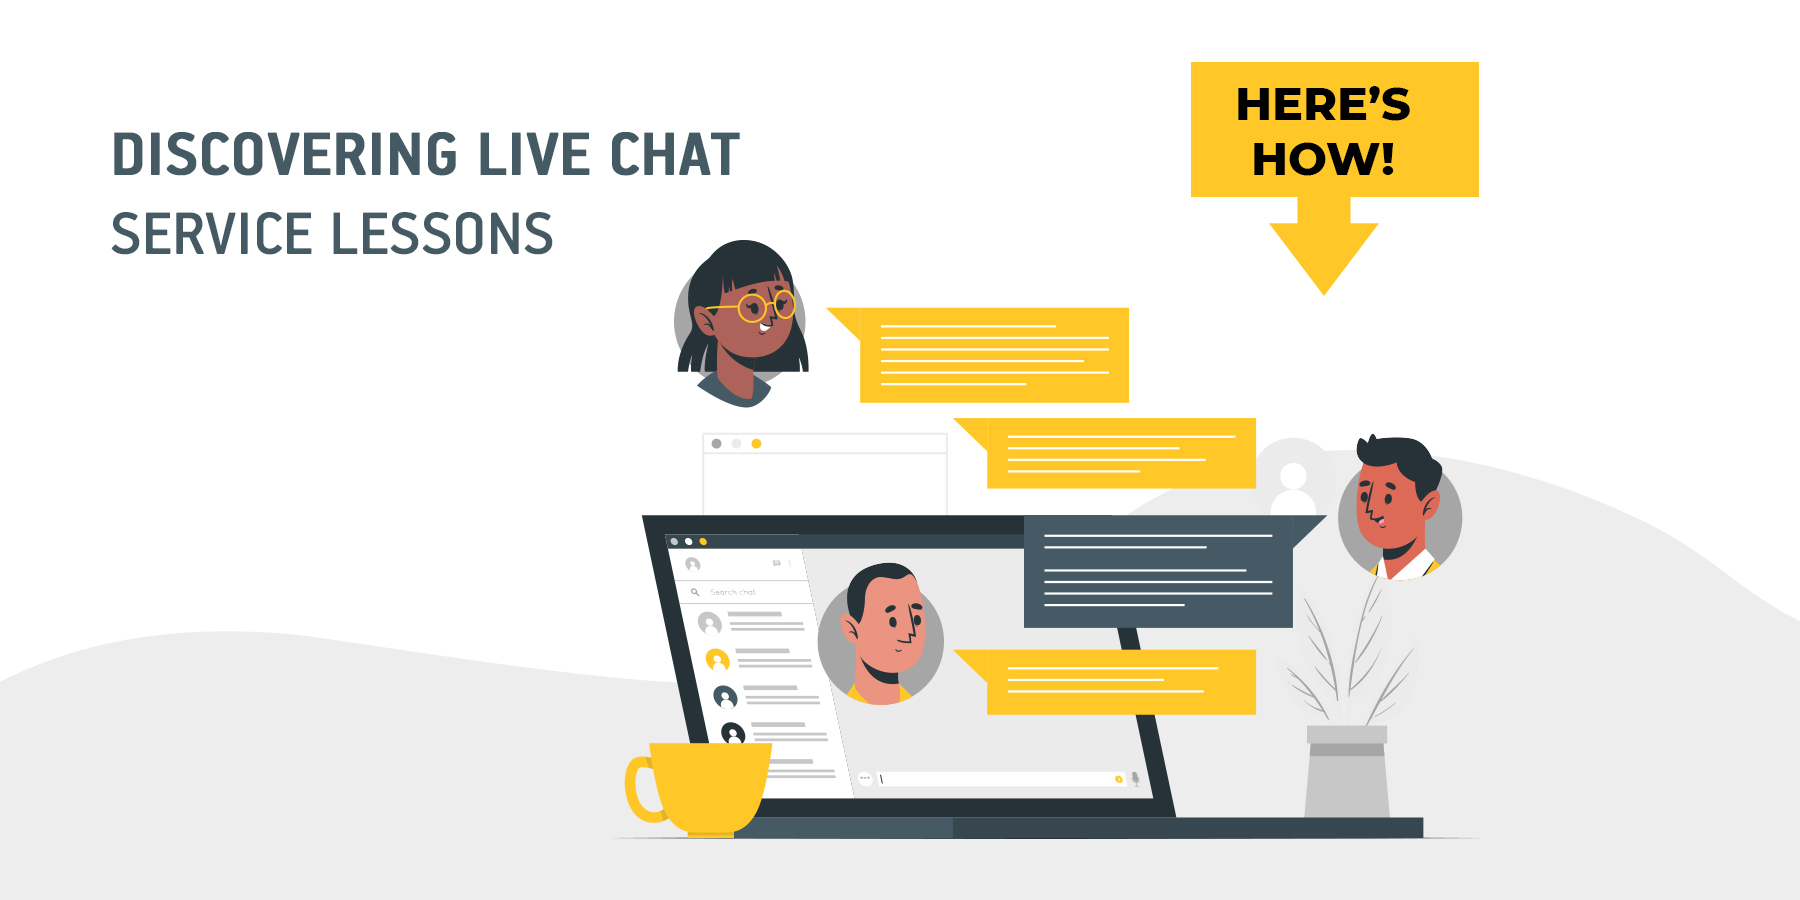 Live Chat Leads to 48 Increase in Revenue per Chat Hour Heres How